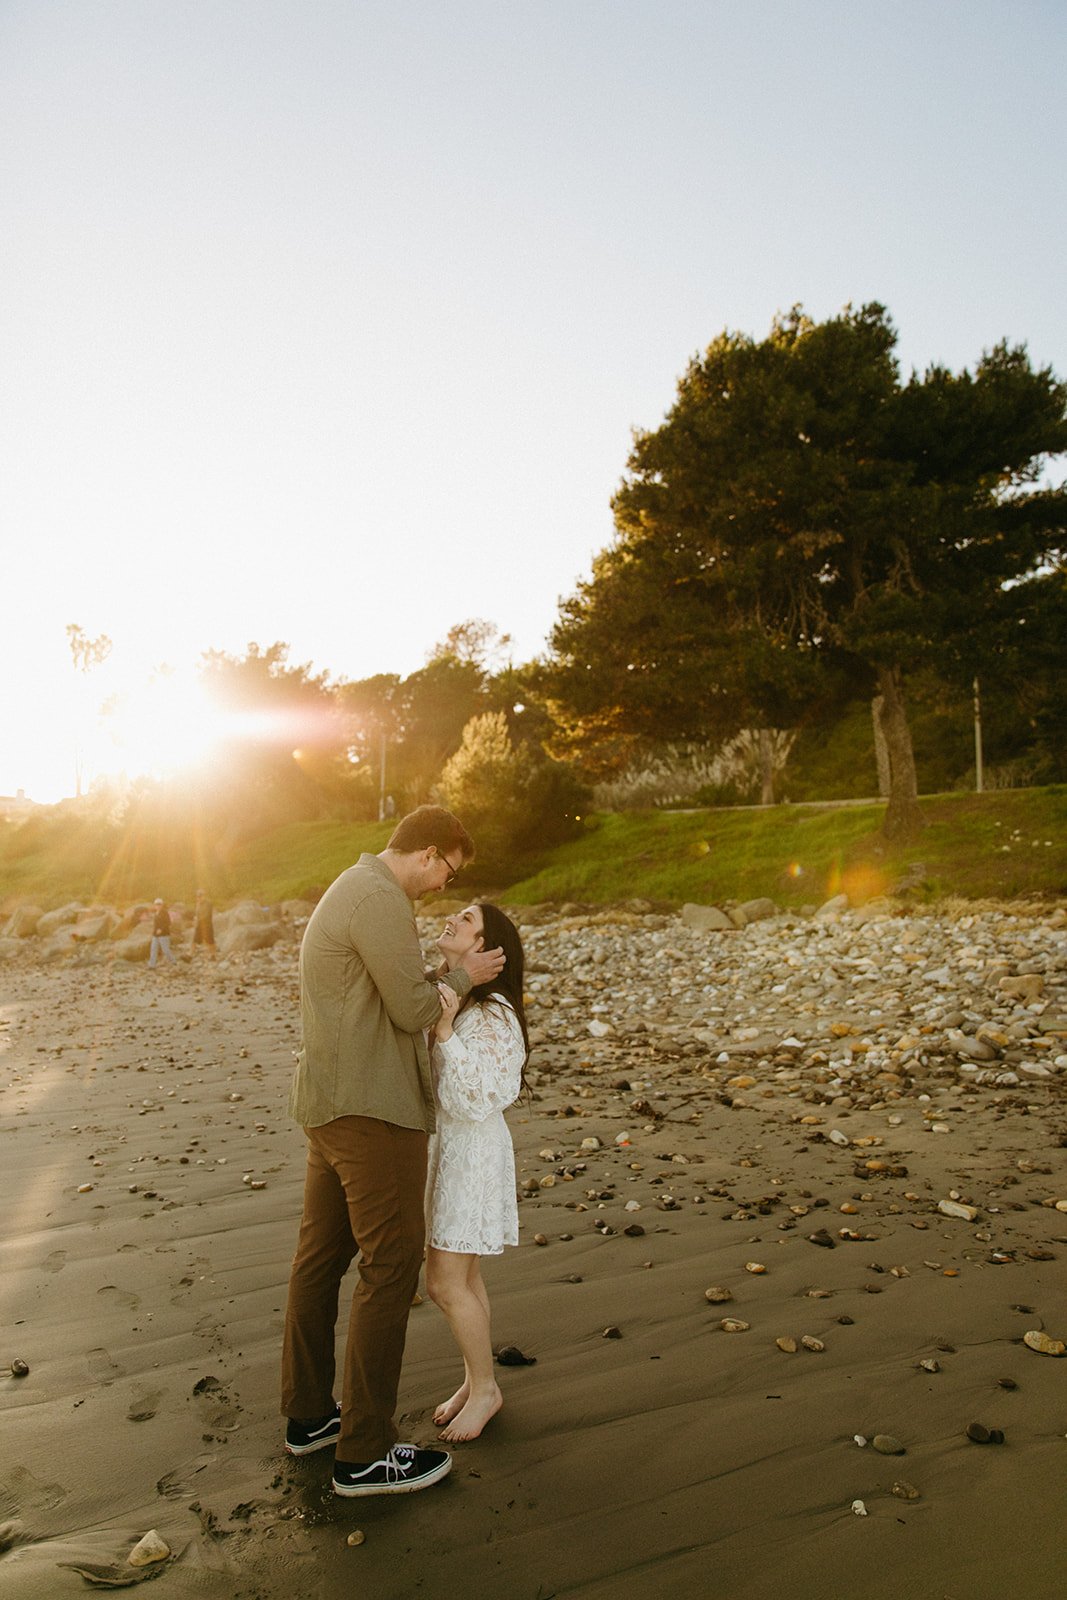 Dreamy places for your Engagement session